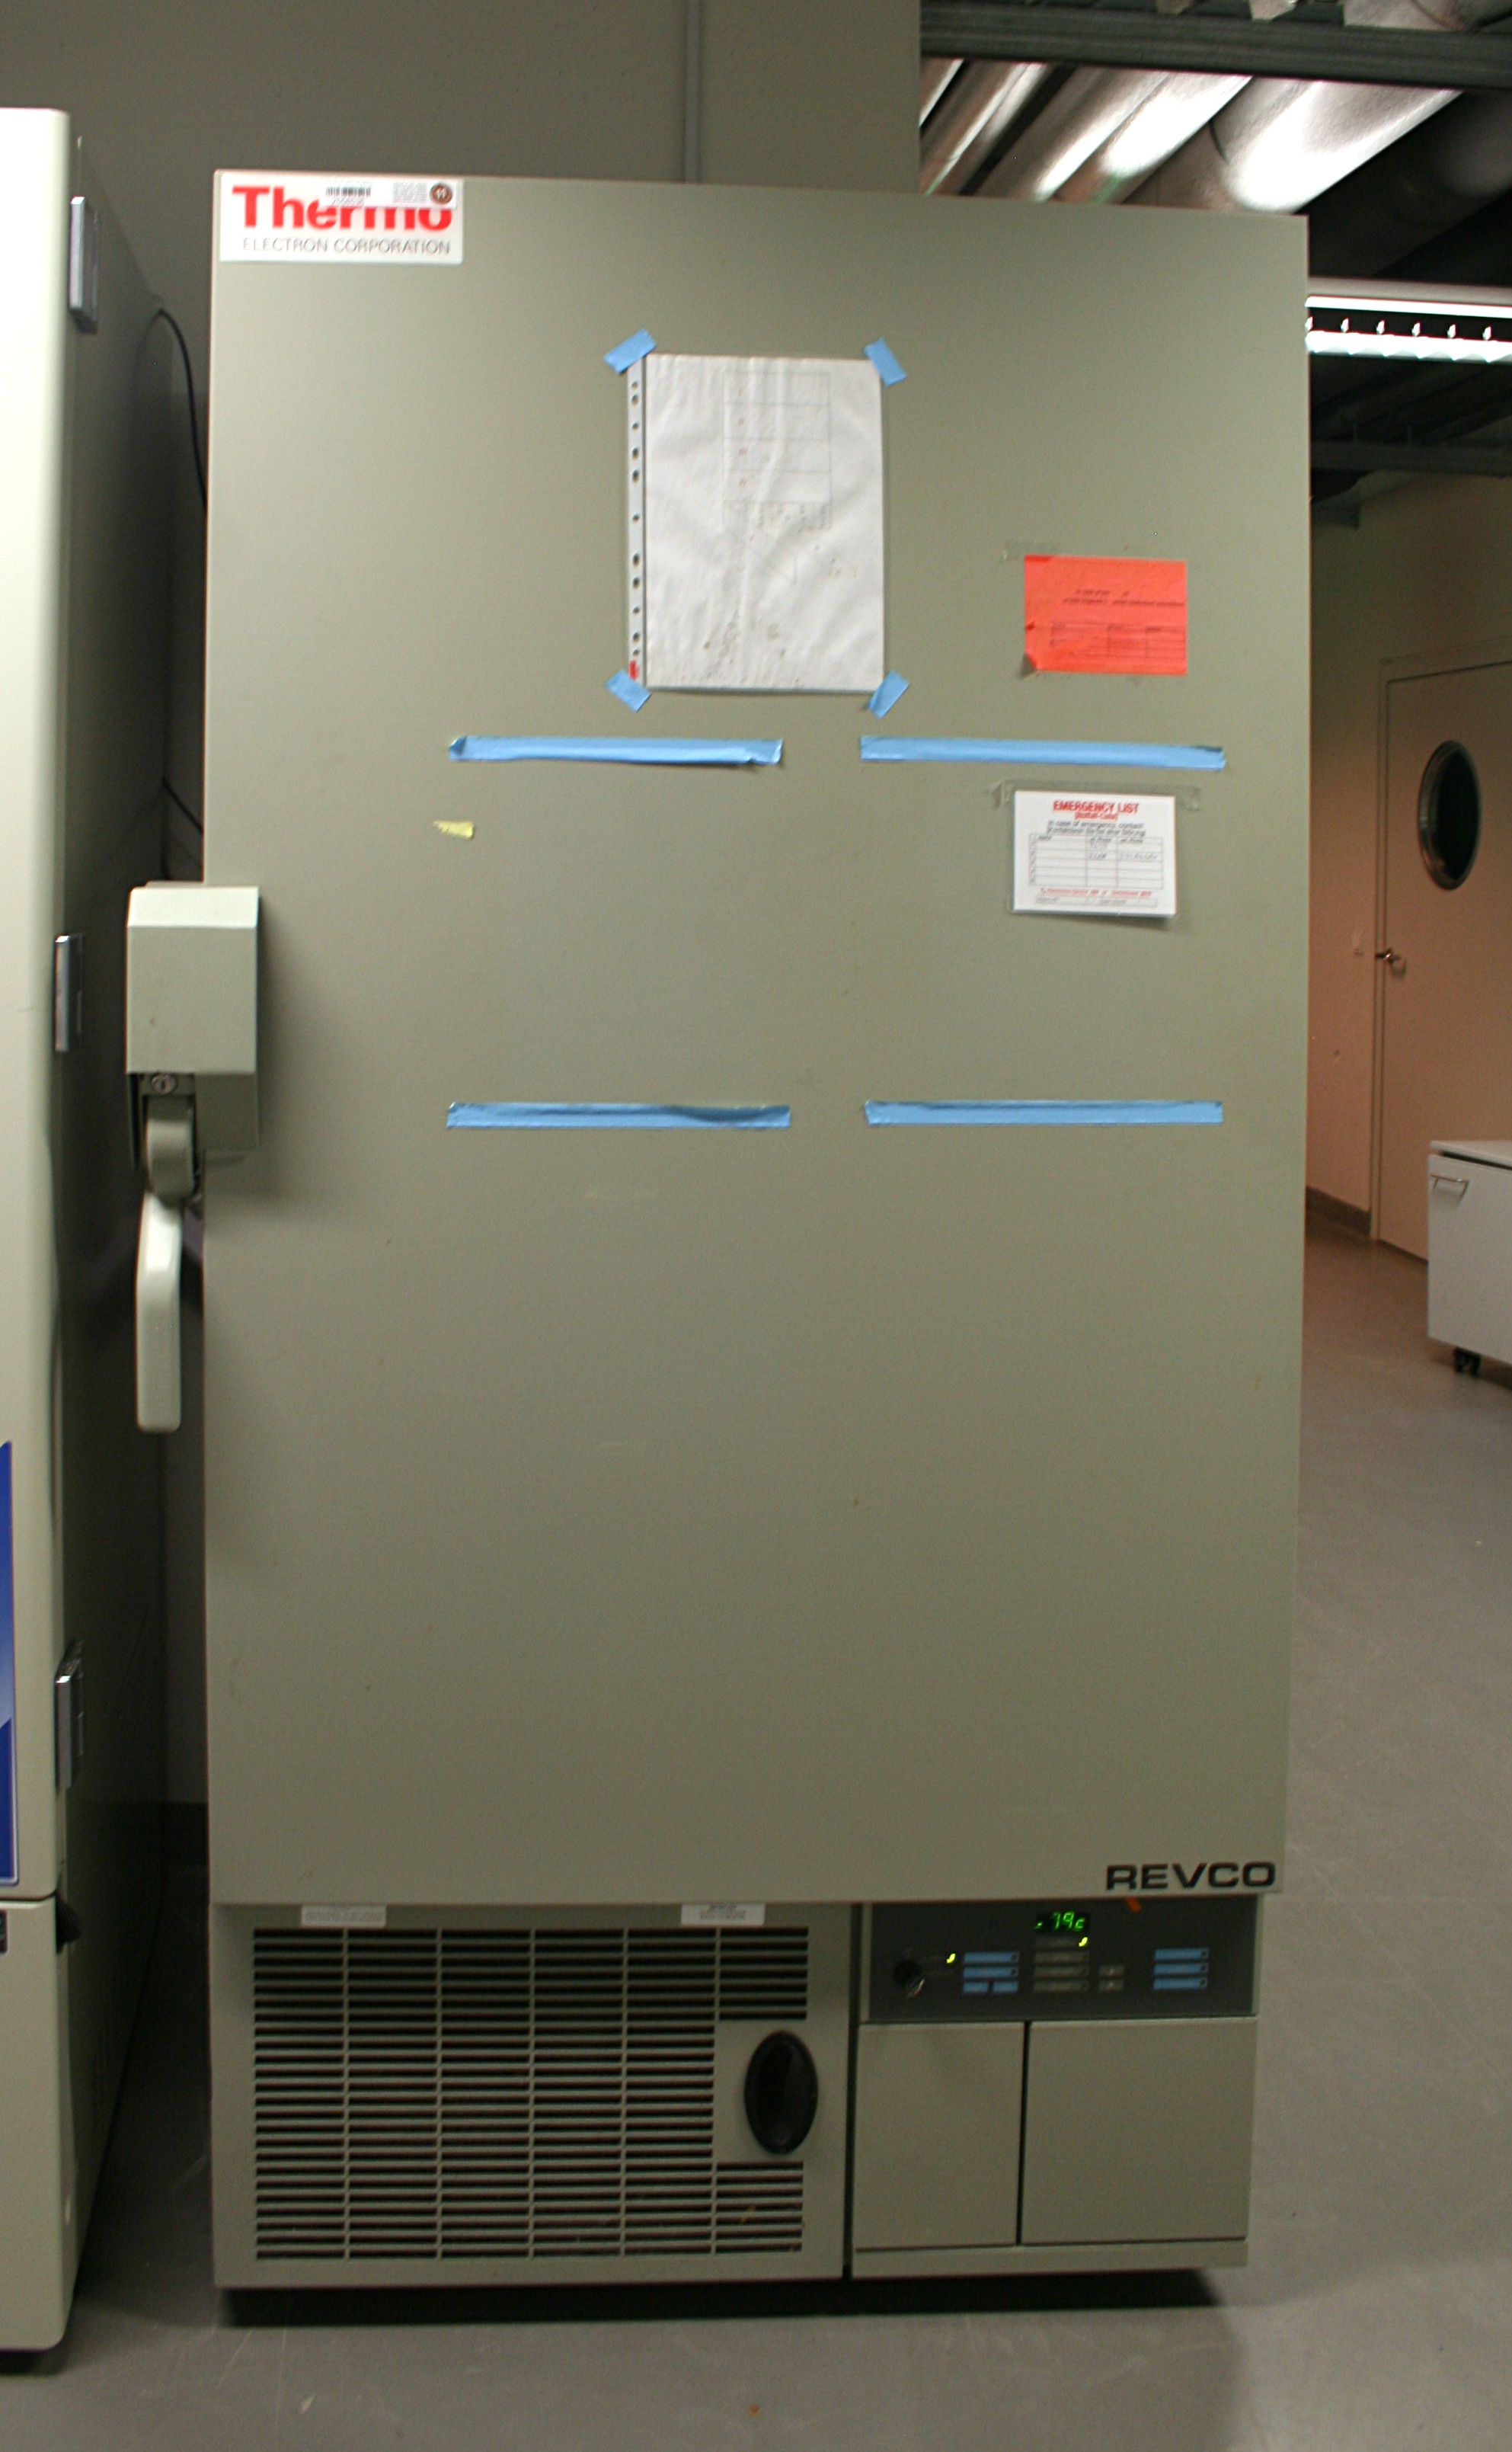 A common ultracold freezer found in a lab. It stands upright, with a temperature readout on the bottom